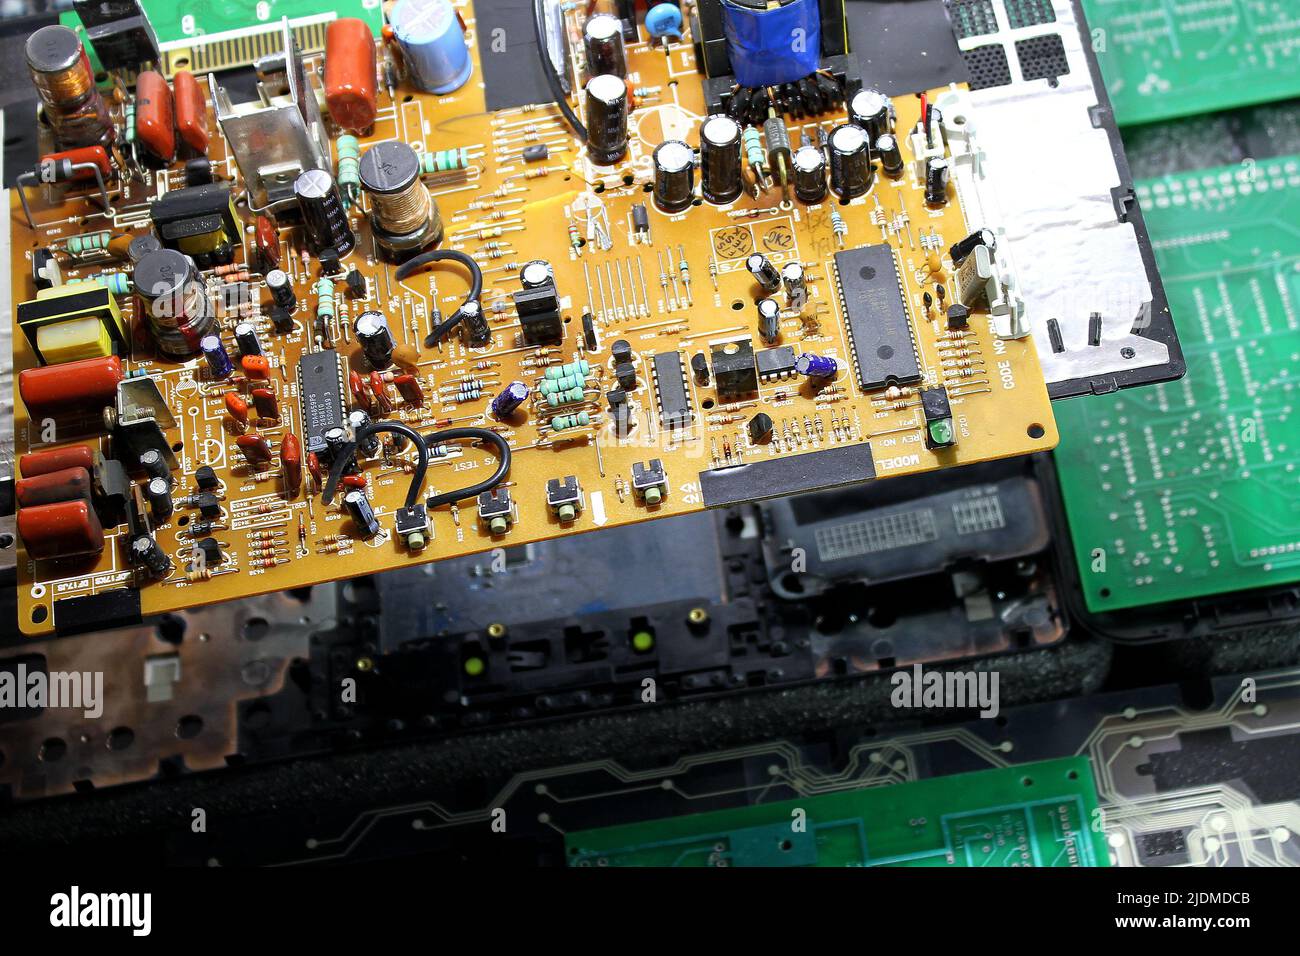 Repair Of Circuit Board With Microchips And Radio Components Stock Photo